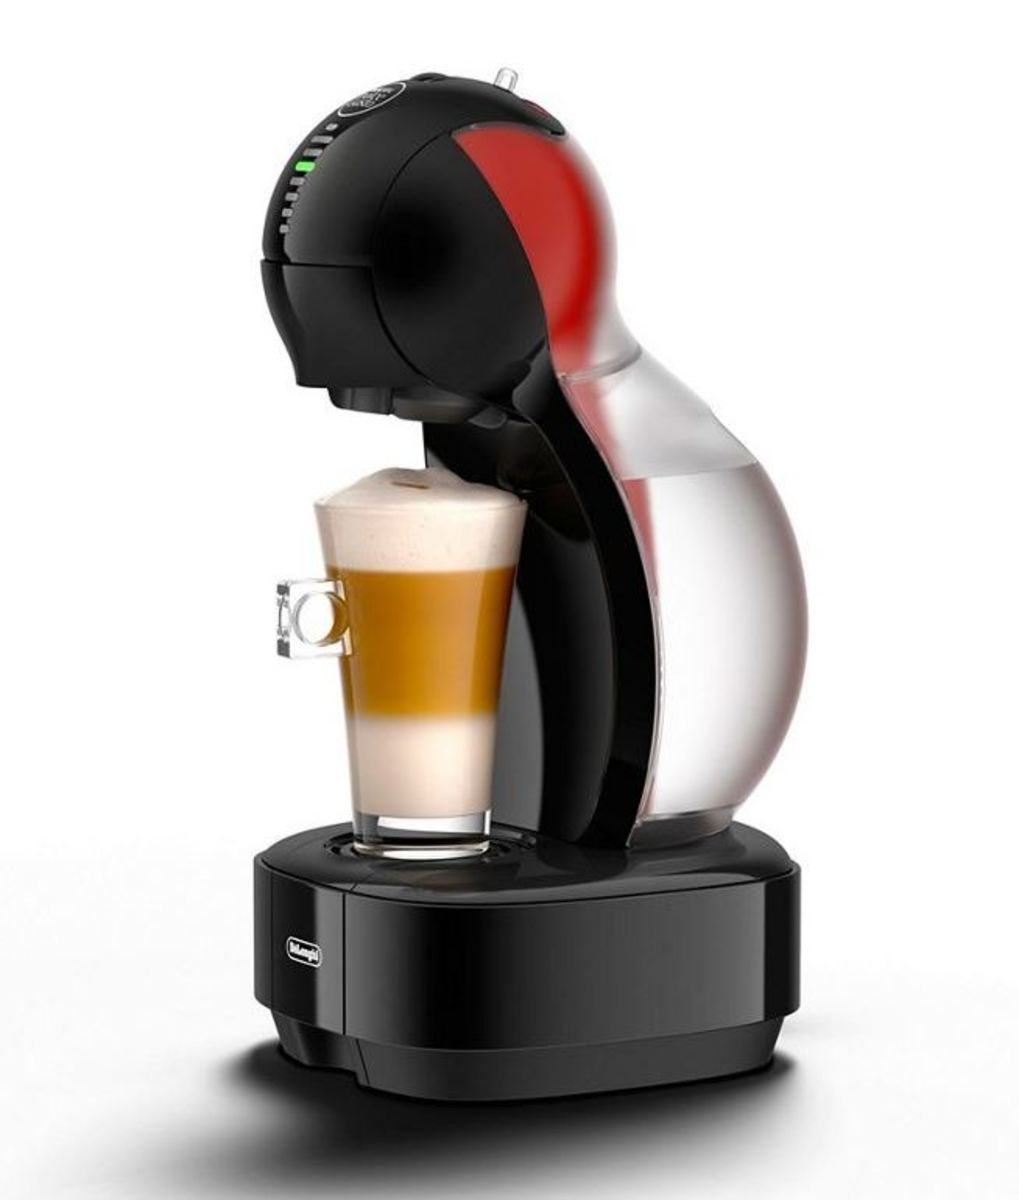 Venlighed kutter styrte Nescafe Coffee Machine Dolce Gusto Colors Black Online at Best Price |  Coffee Makers | Lulu UAE